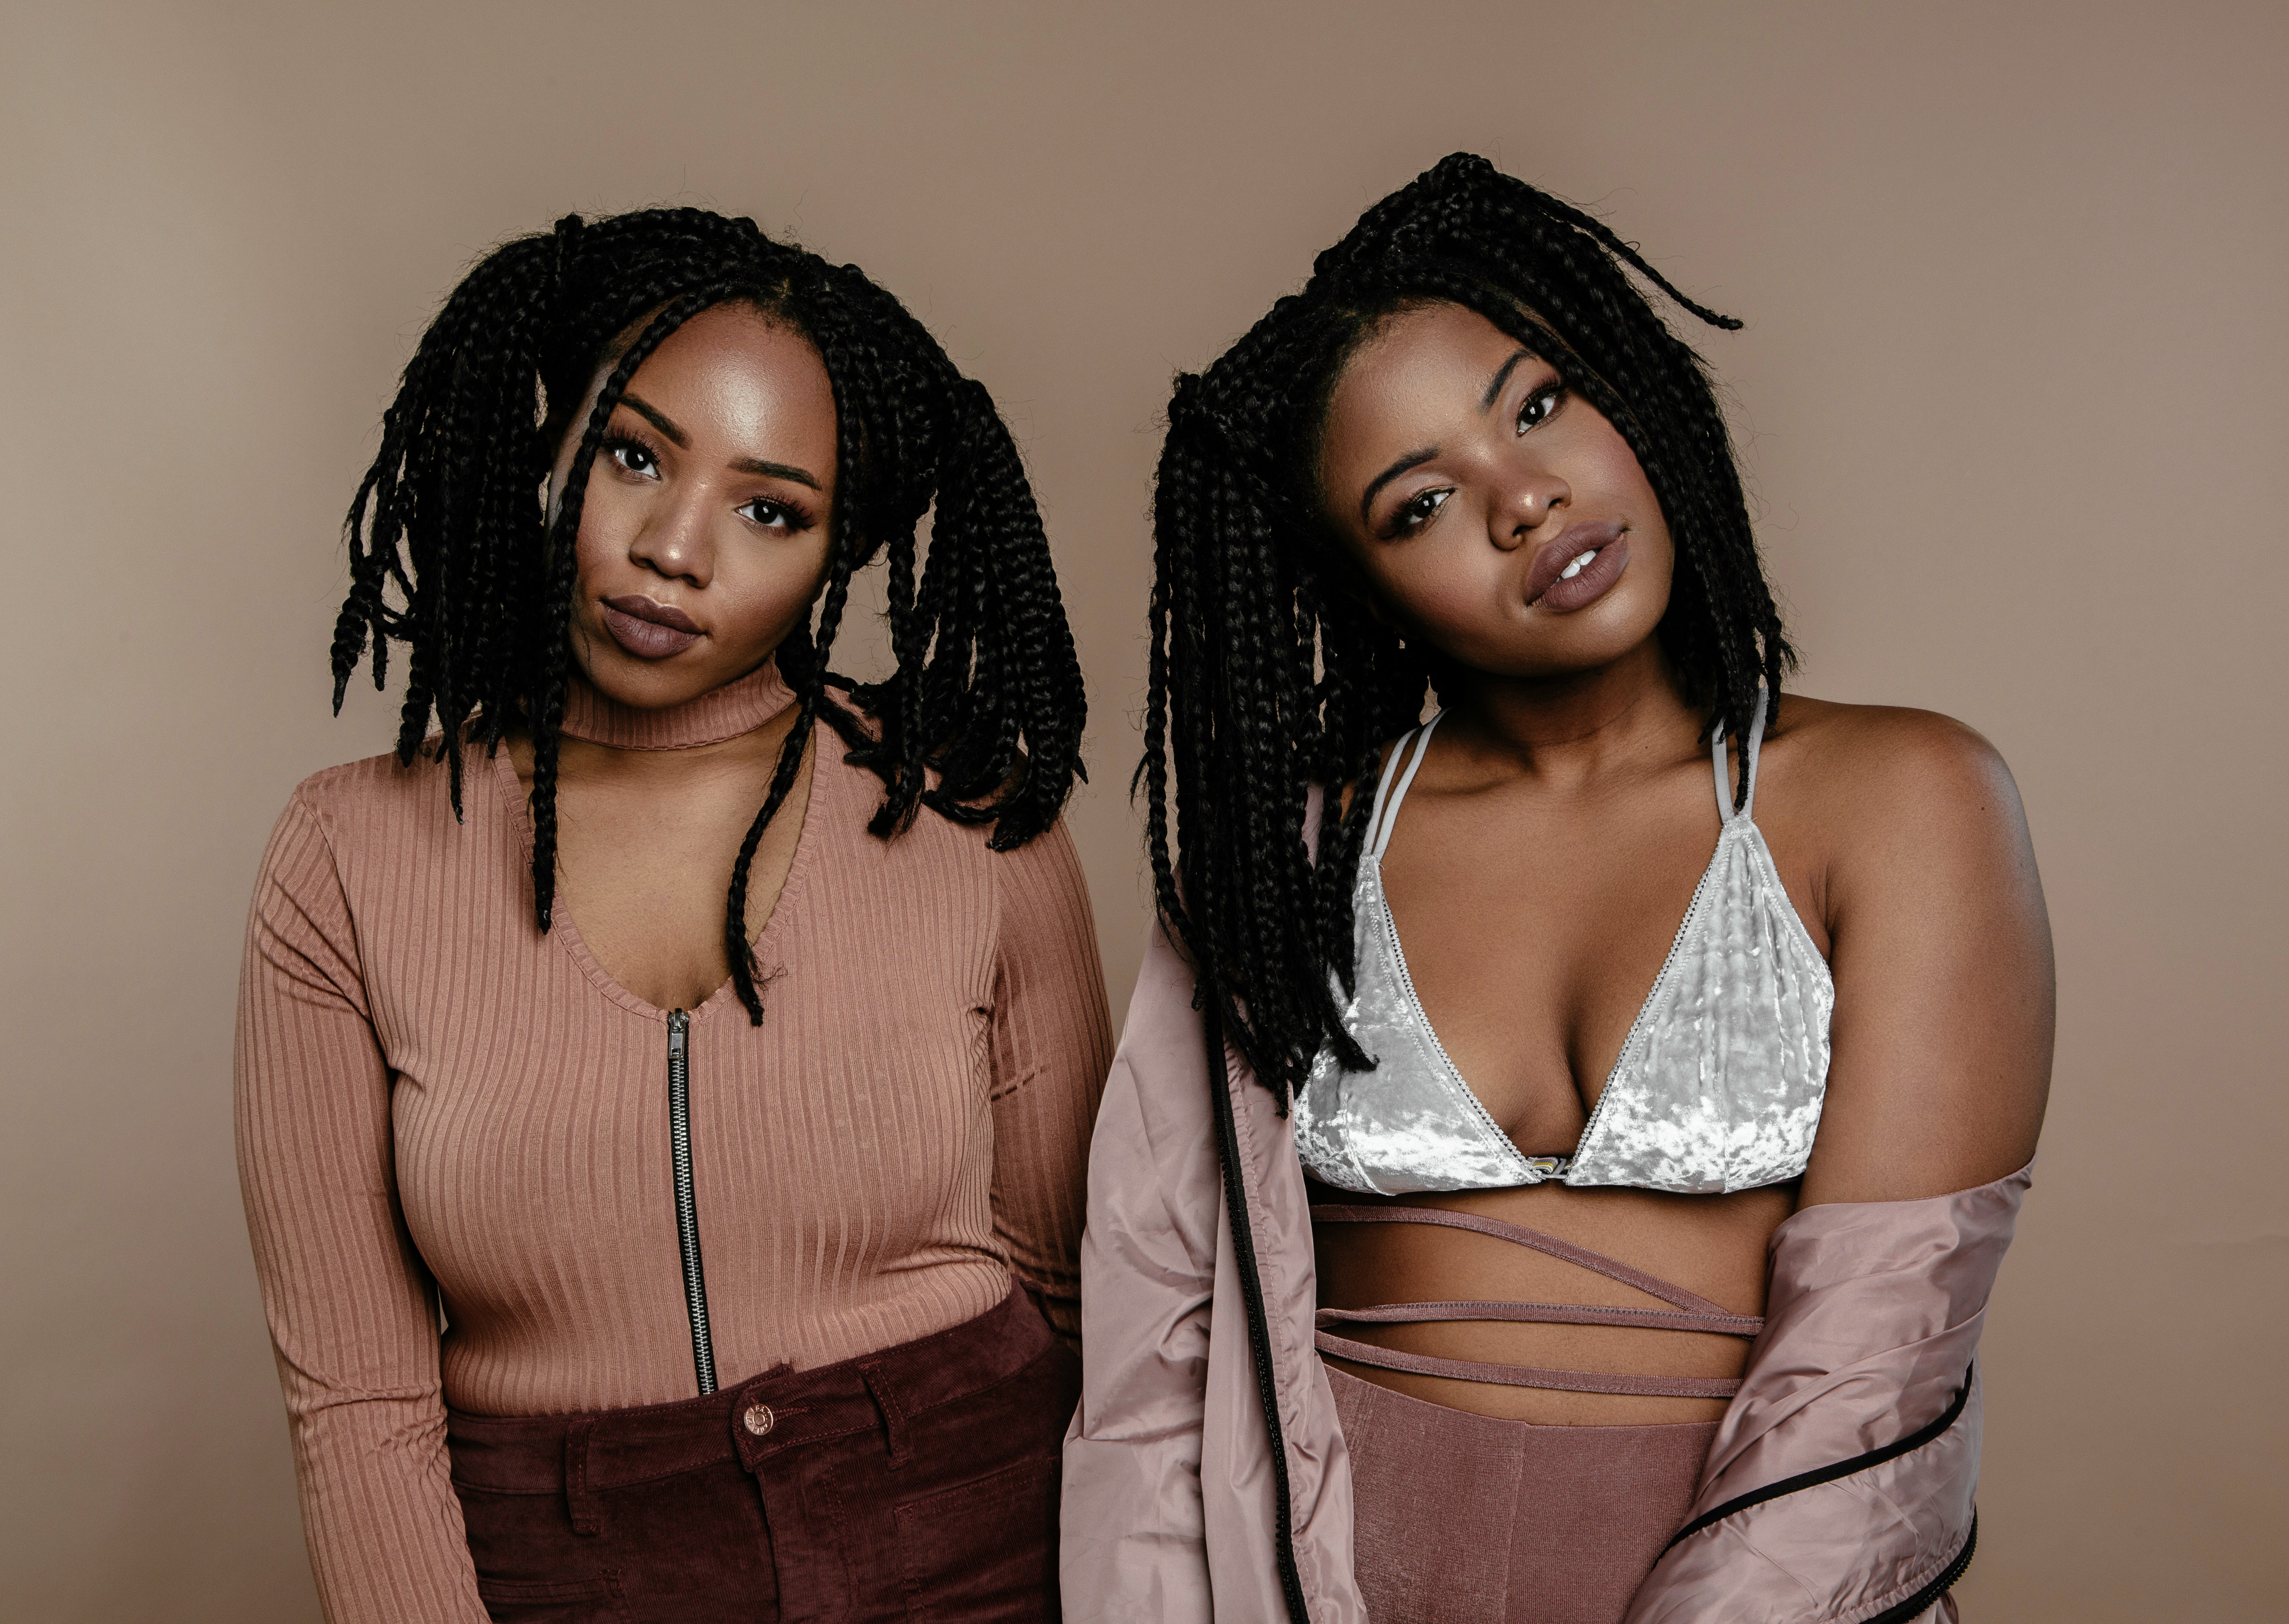 From VanJess To Cardi B: 11 Underrated Singles You May Have Missed In 2018